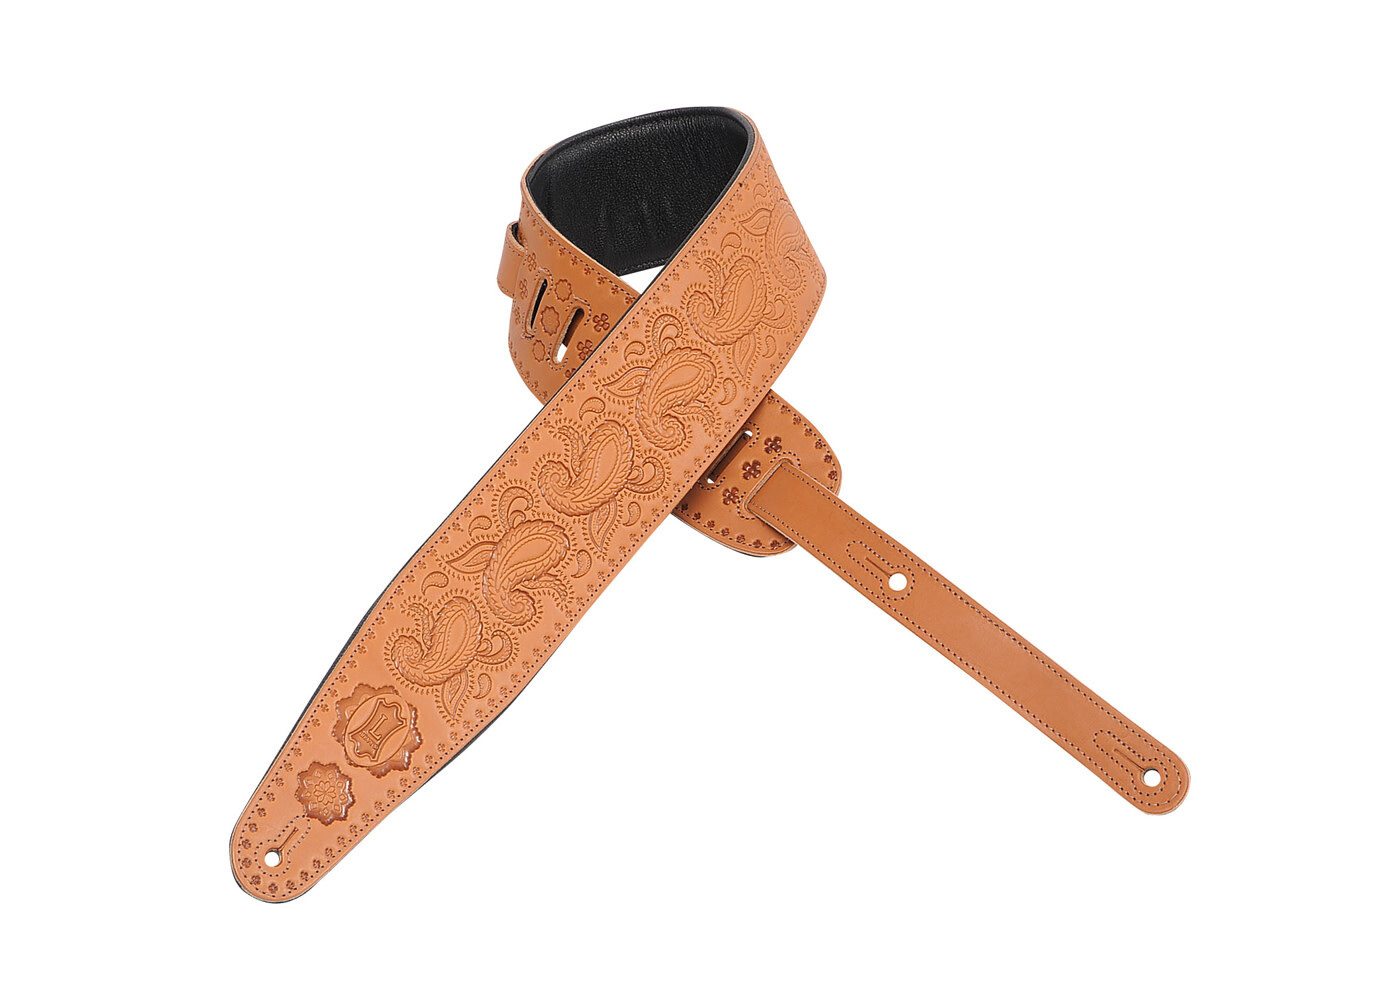 Levy's Levy's Leather Tooled Leather Guitar Strap - Russett